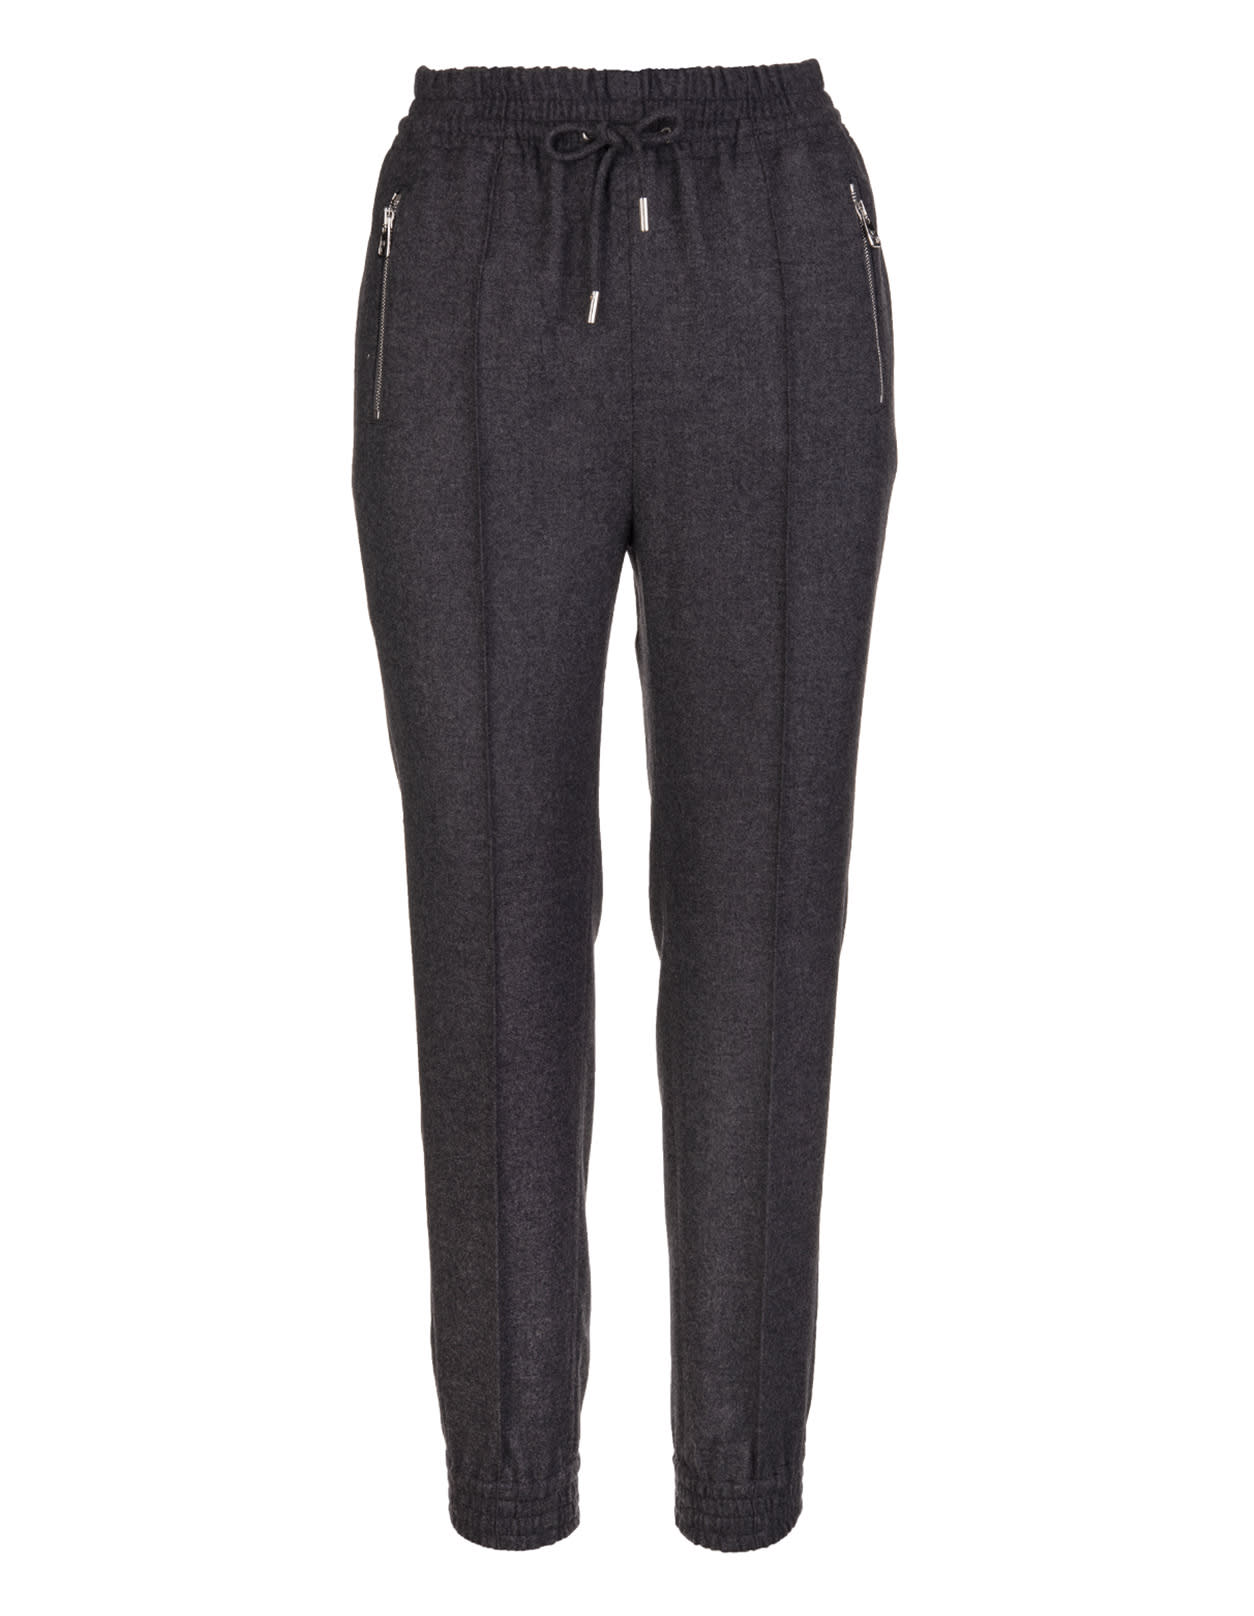 Ermanno Scervino Dark Grey Wool Trousers With Drawstring Waist